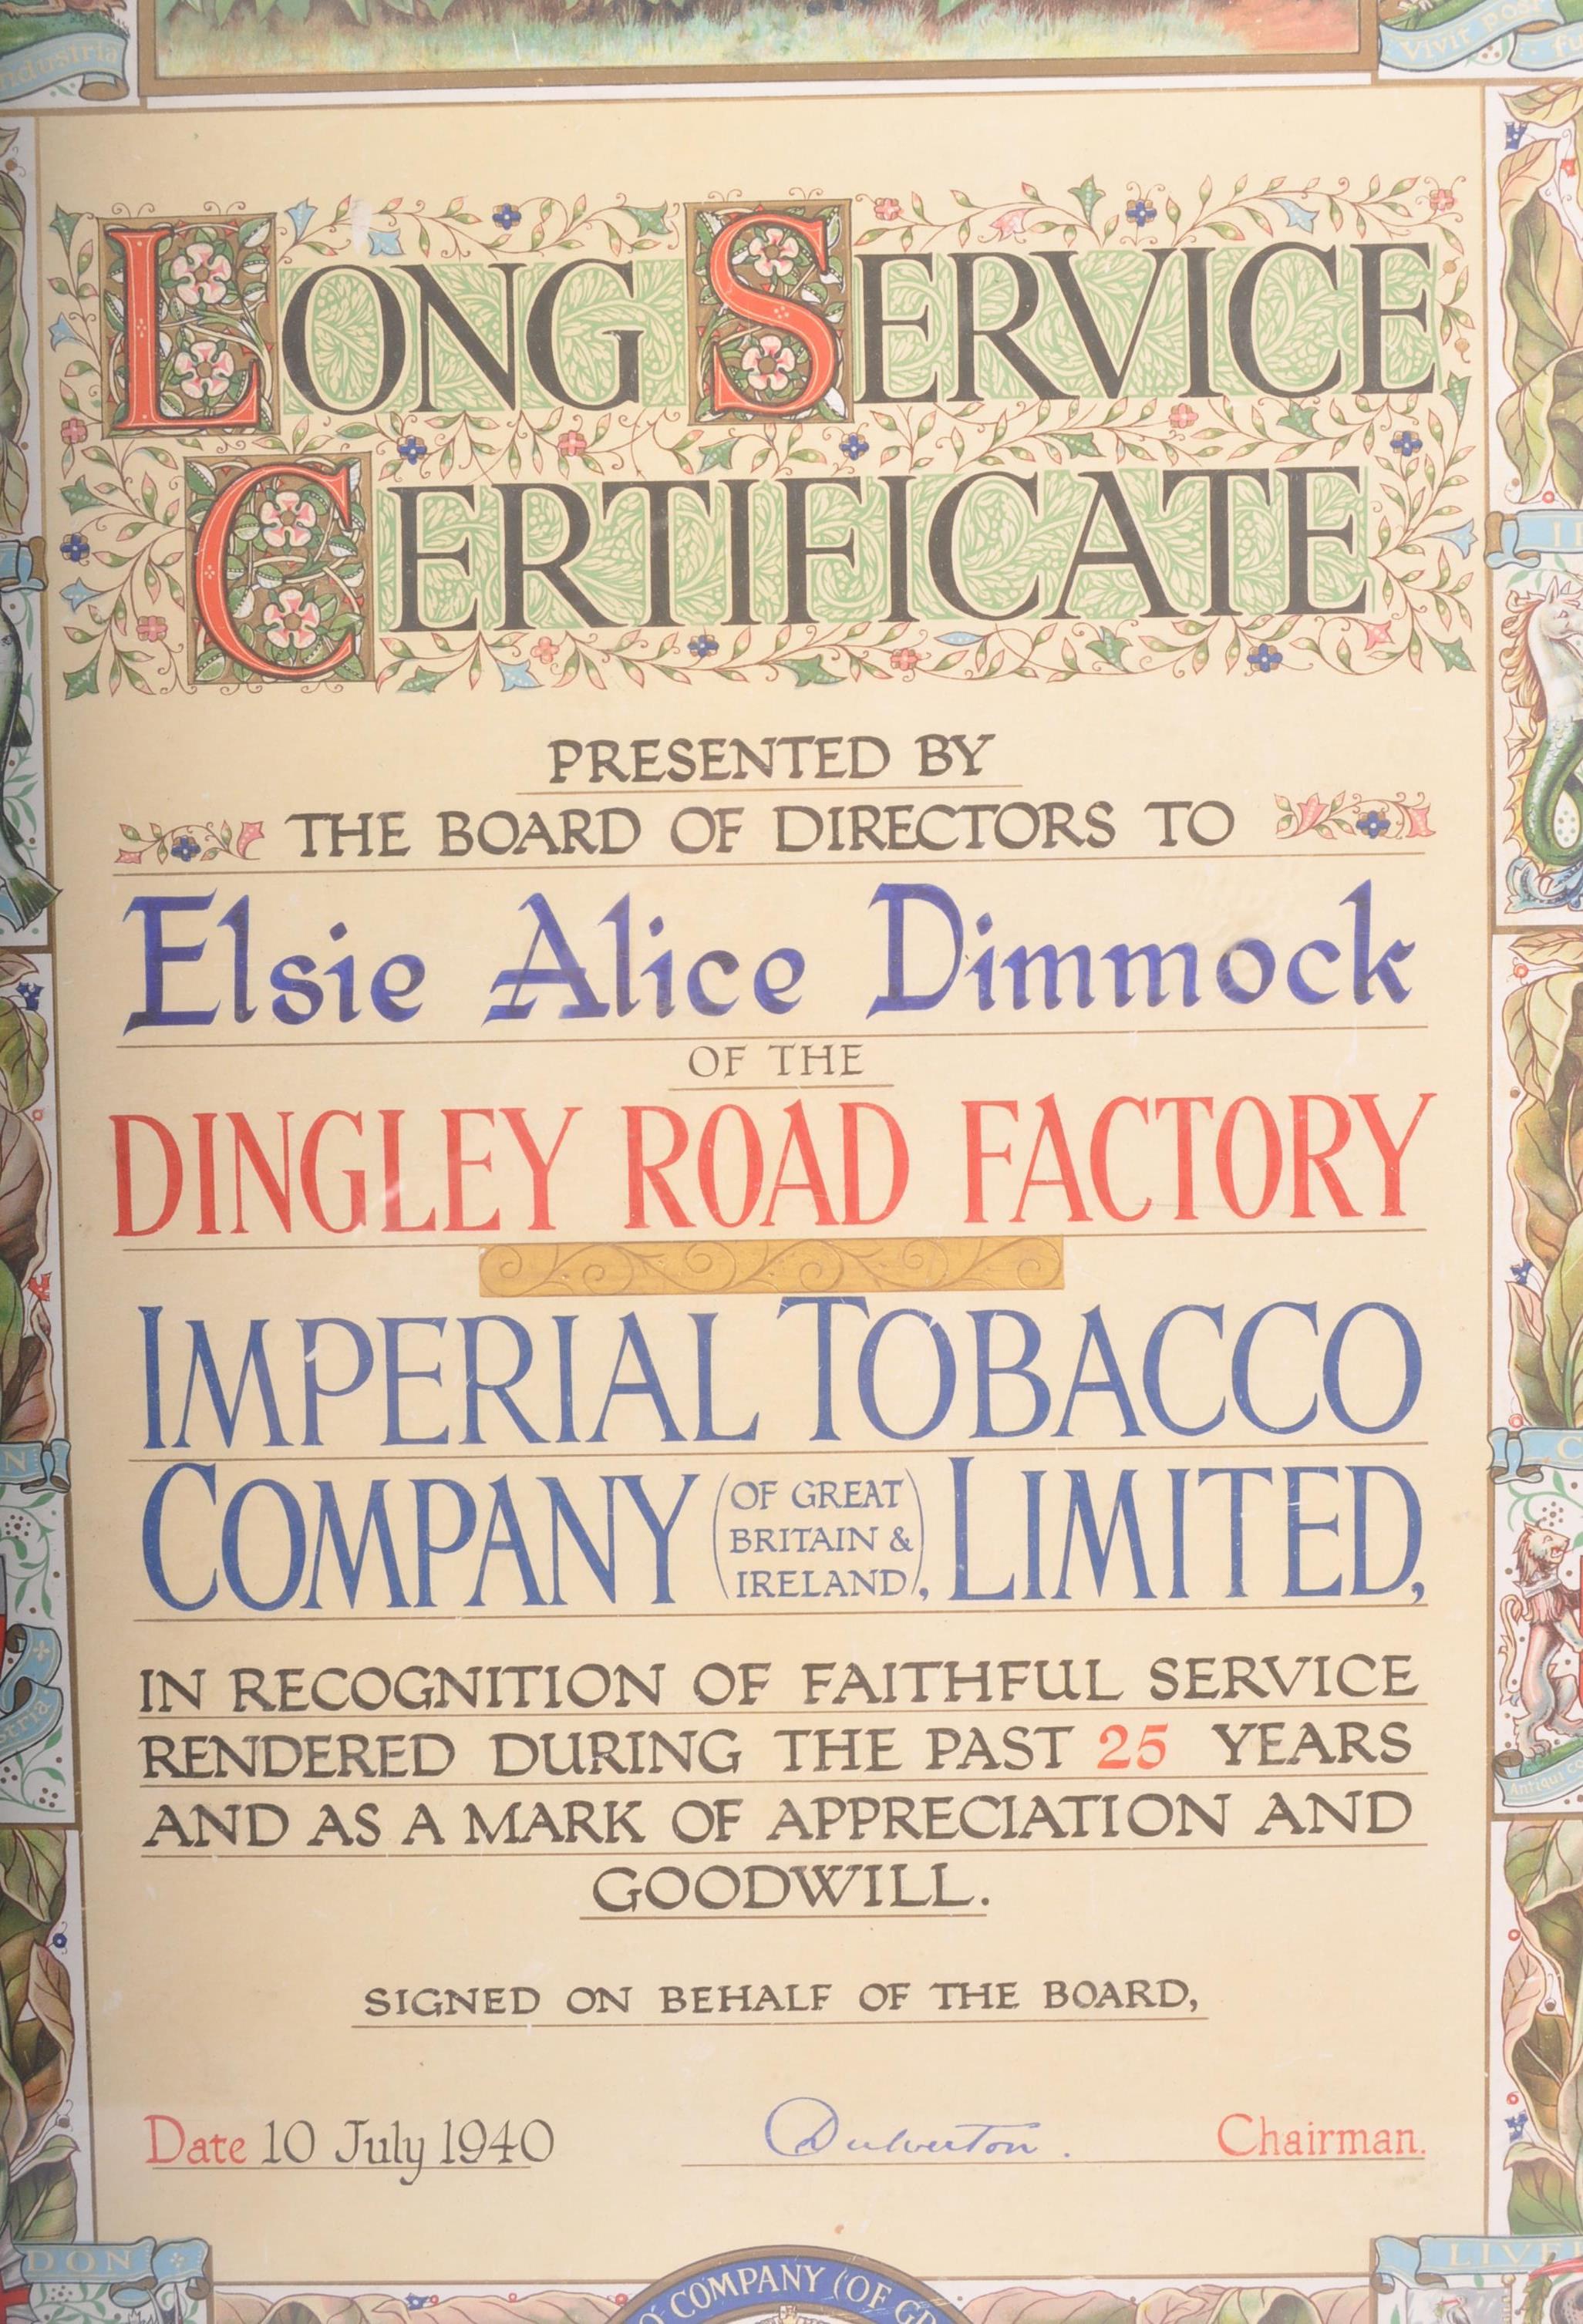 LONG SERVICE CERTIFICATE - IMPERIAL TOBACCO COMPANY - Image 2 of 5